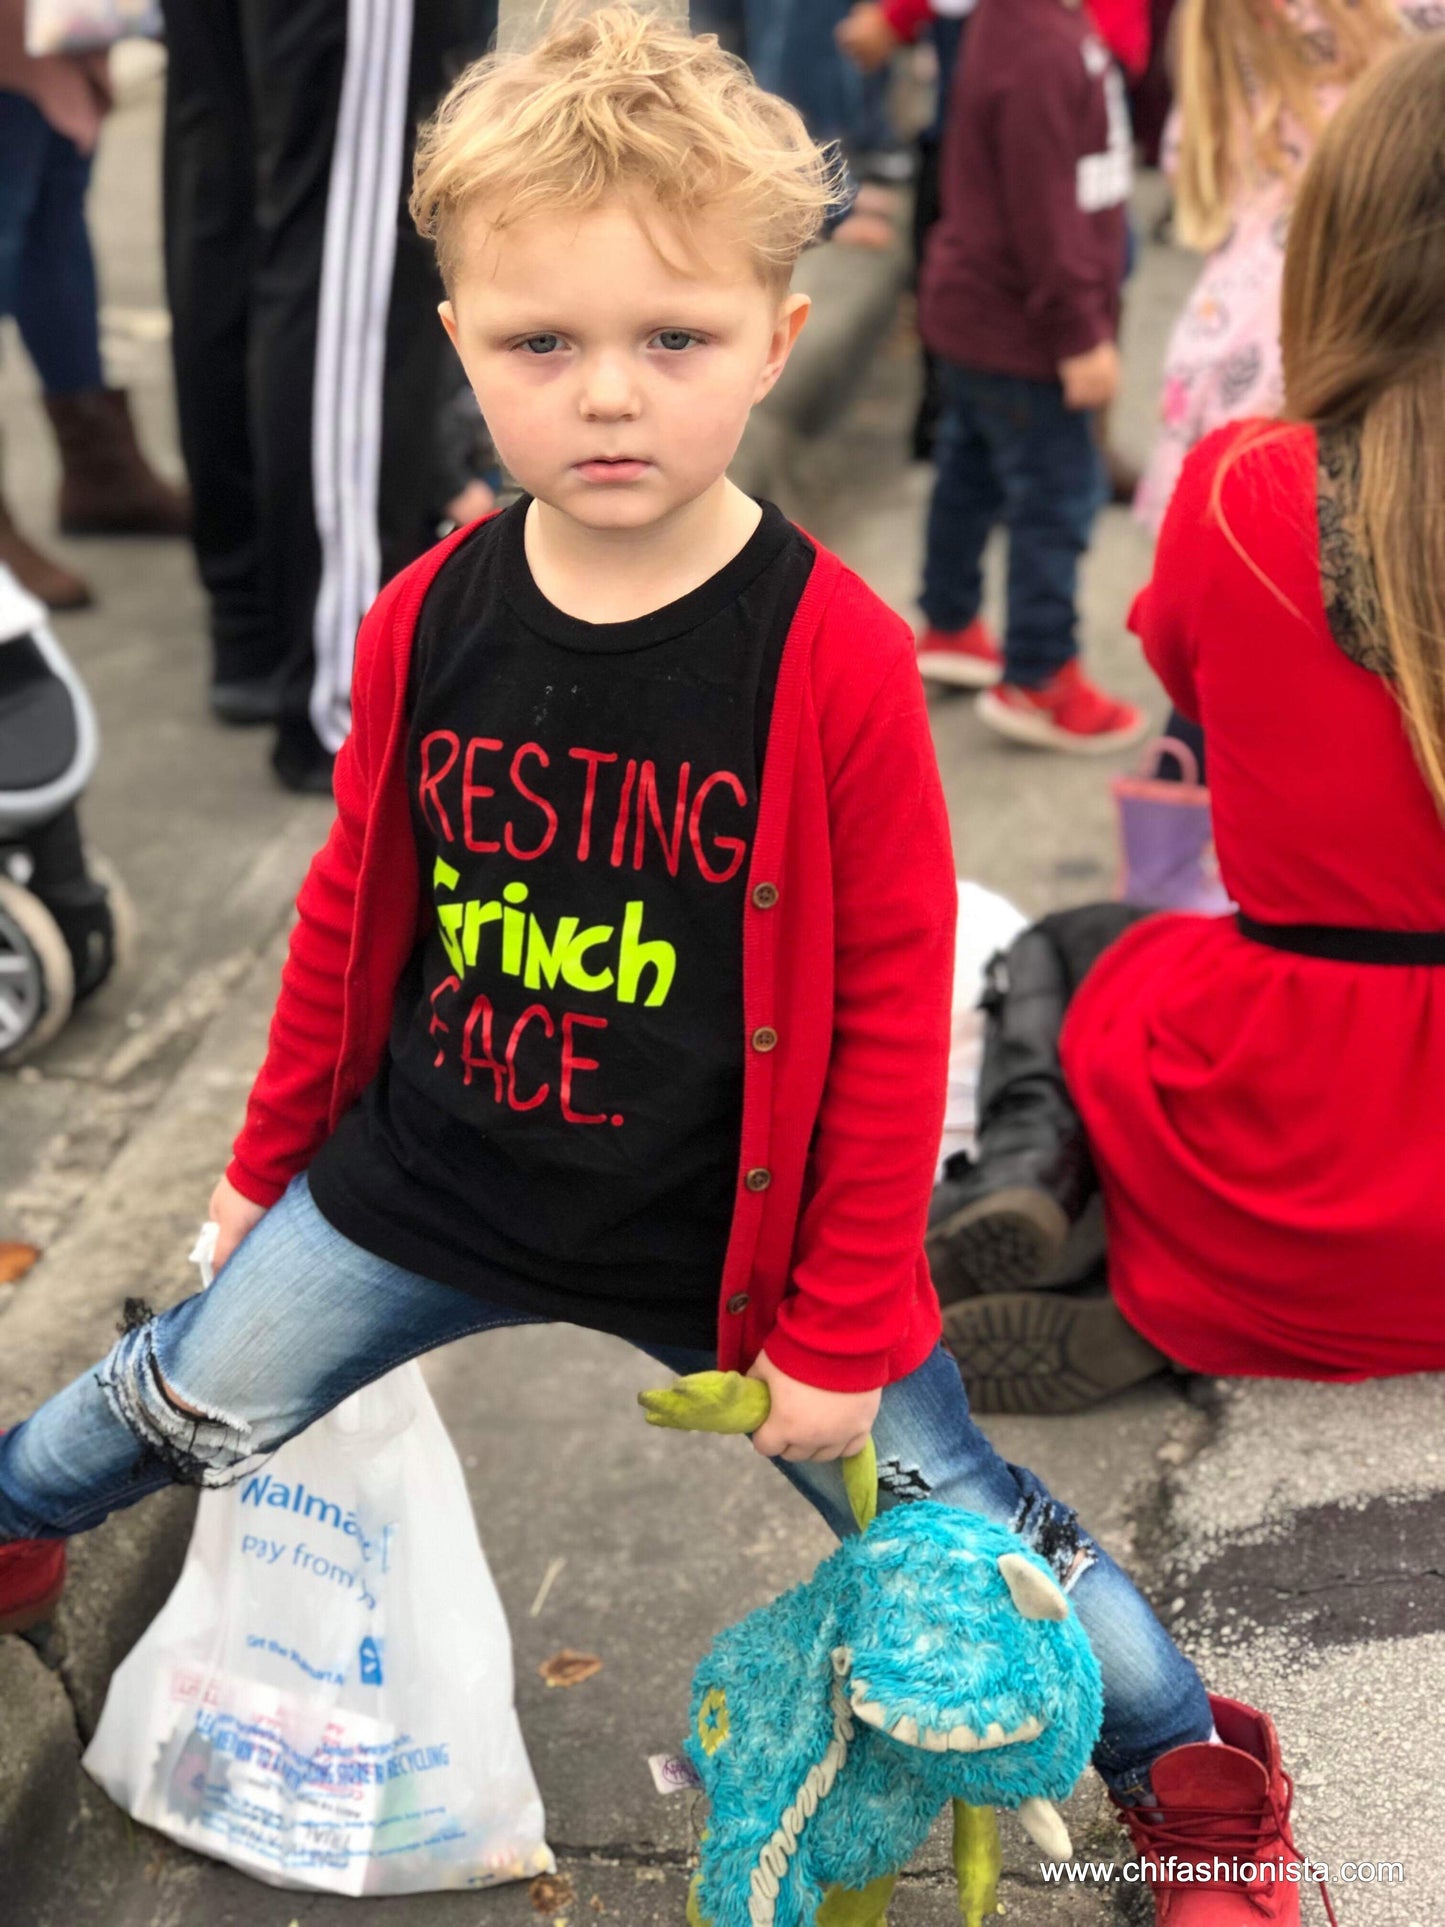 Resting Grinch Face-Suess